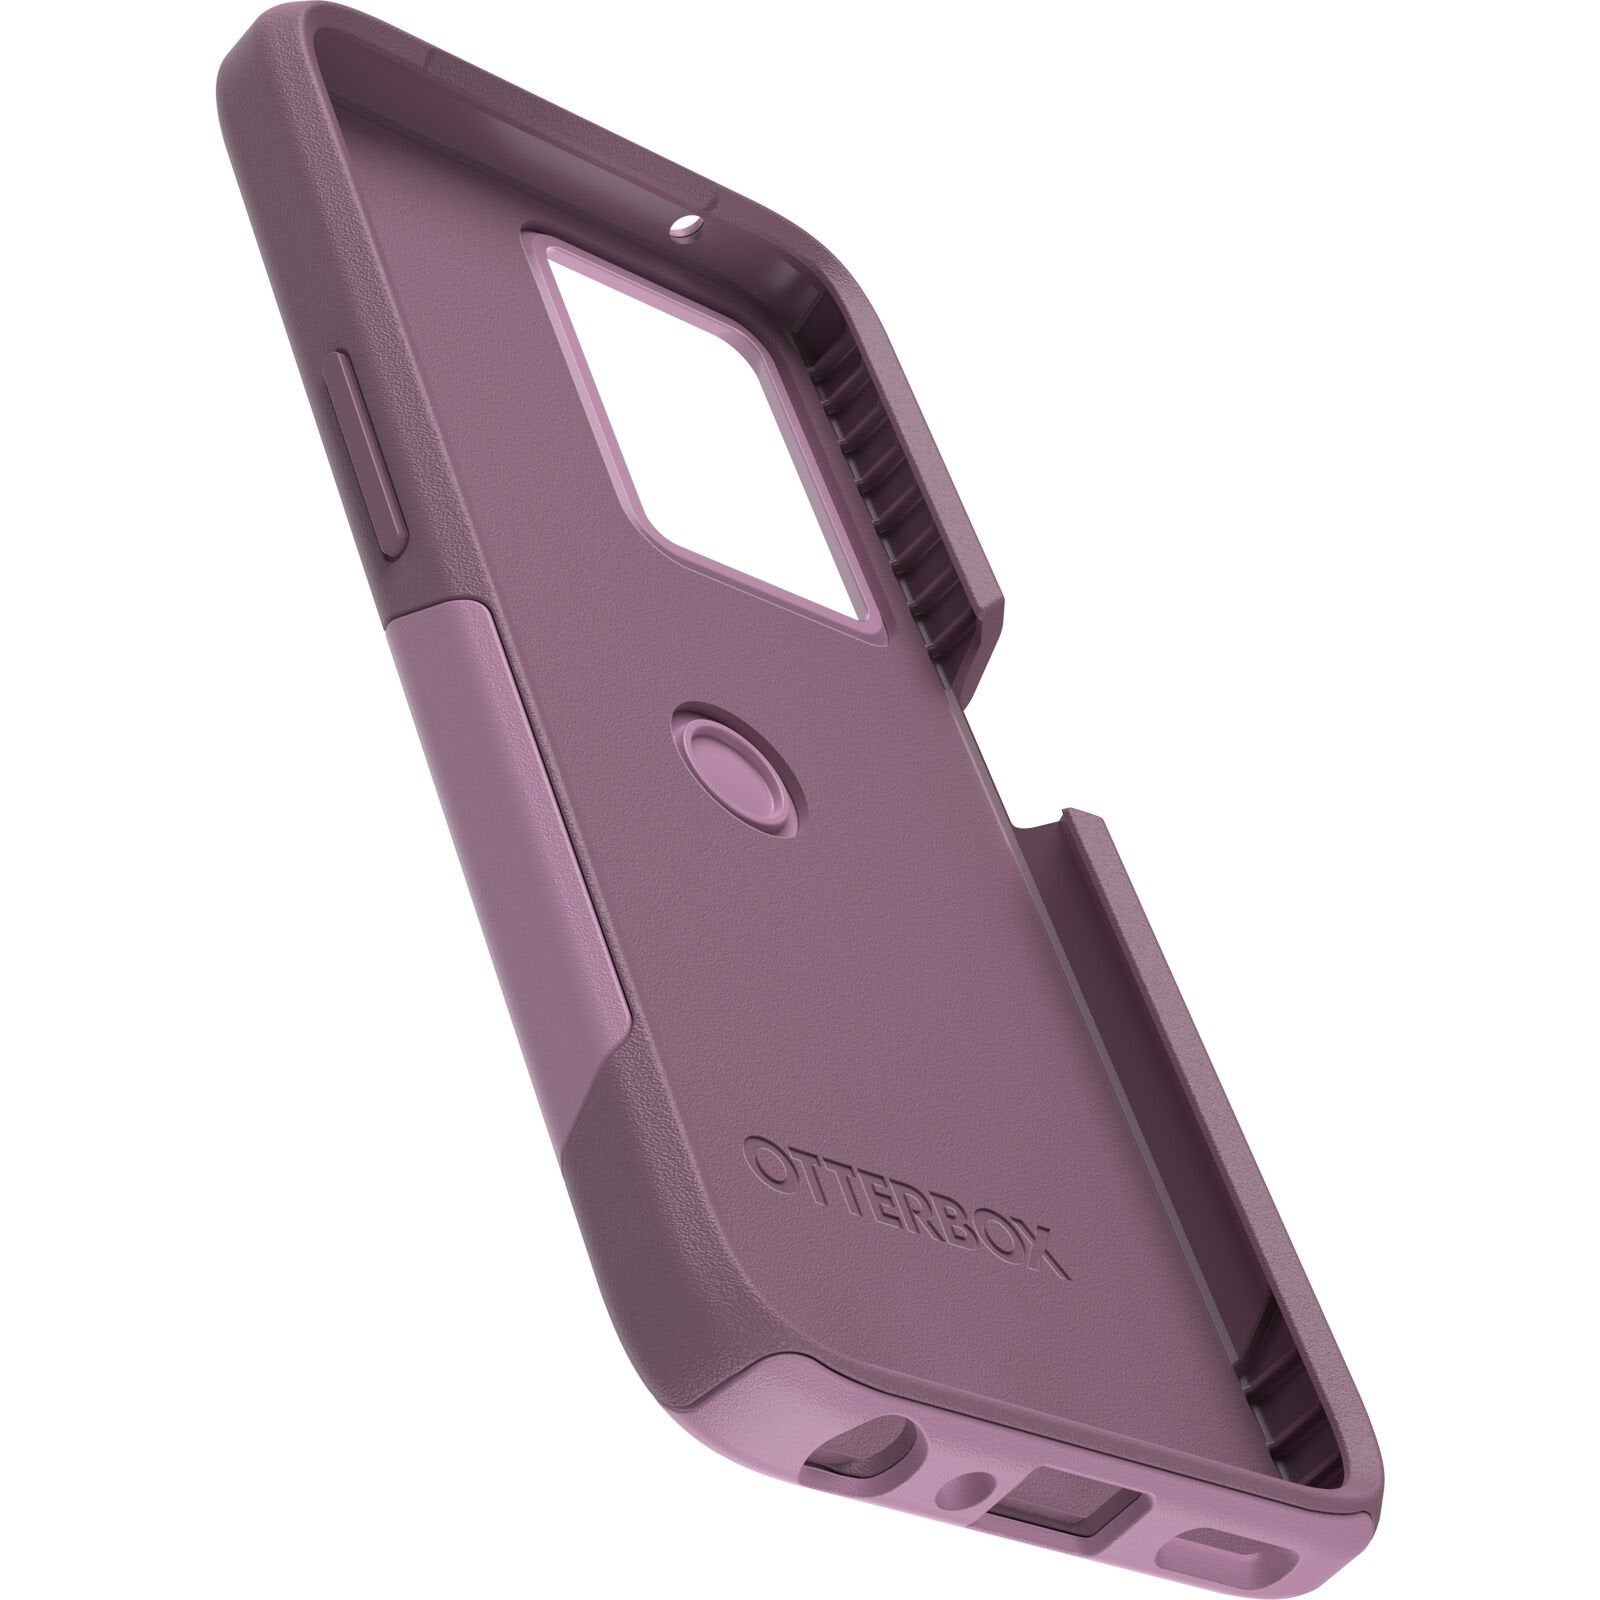 OtterBox COMMUTER SERIES Case for OnePlus Nord N200 5G - Maven Way (New)